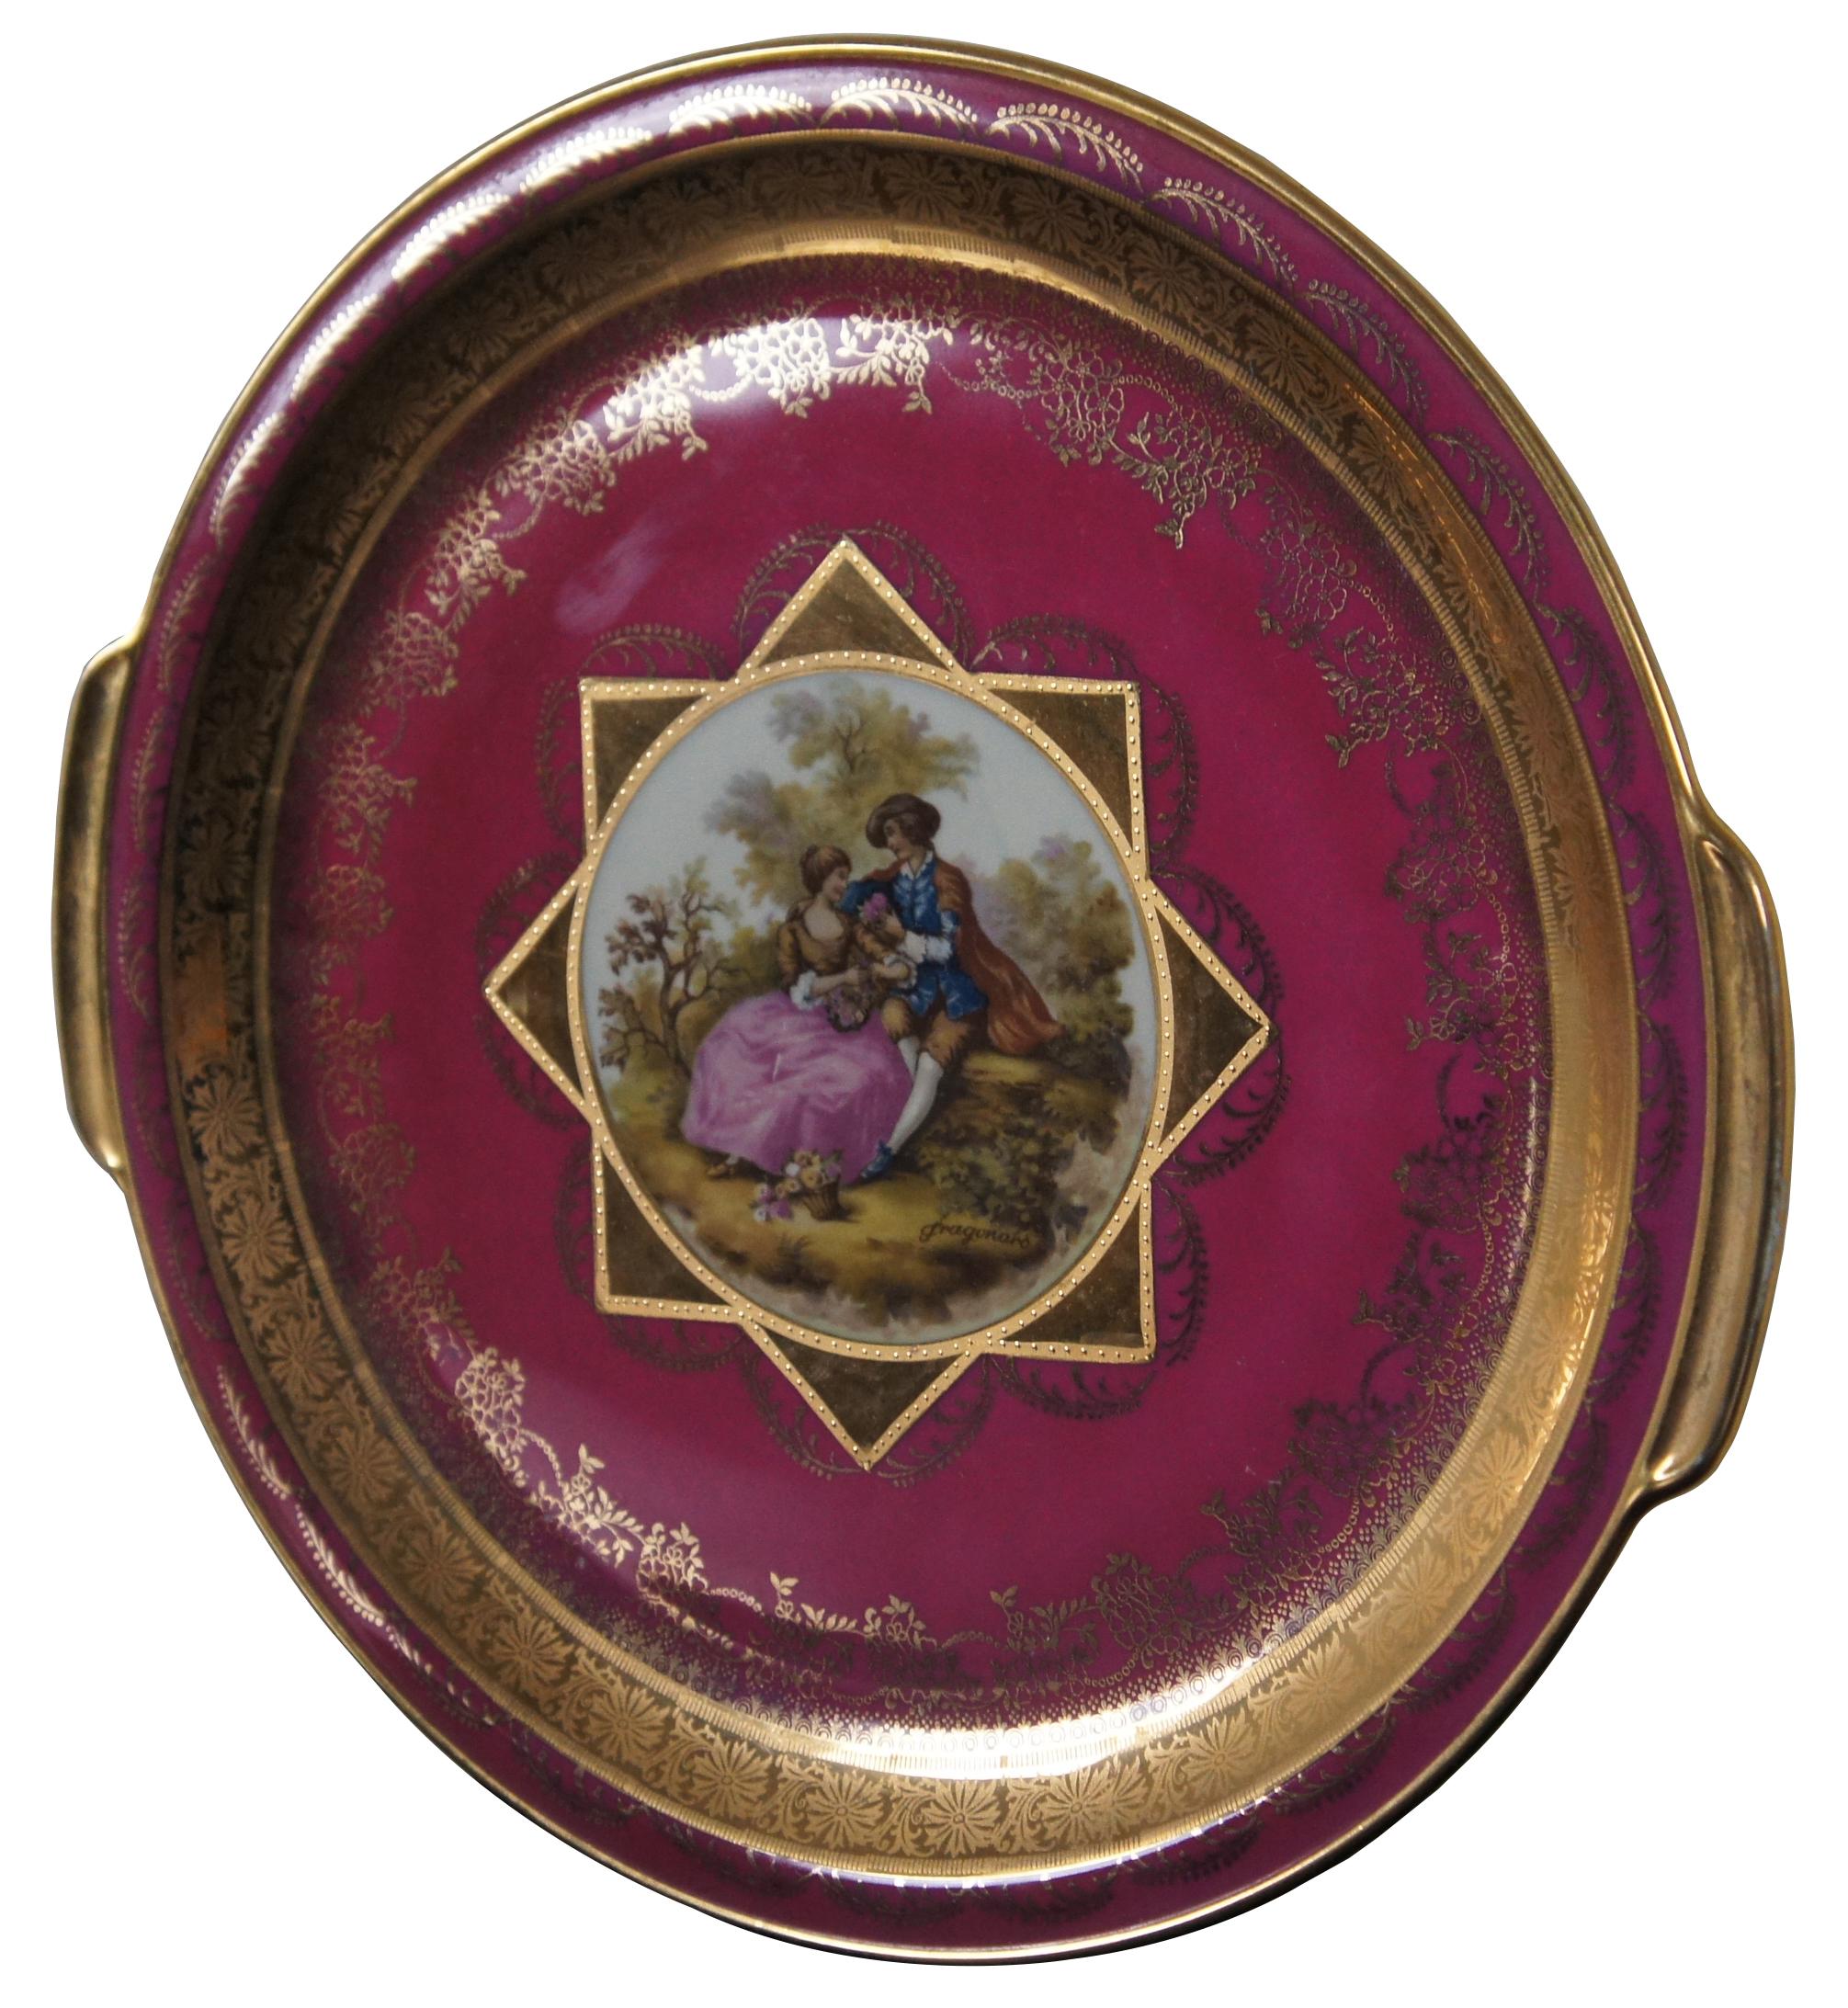 Antique Royal Bavaria Hutschenreuther Selb privat-decor portrait round platter / charger / plate with handles in magenta embossed with gold surrounding a scene of two lovers, by Dragonard. Measures: 12